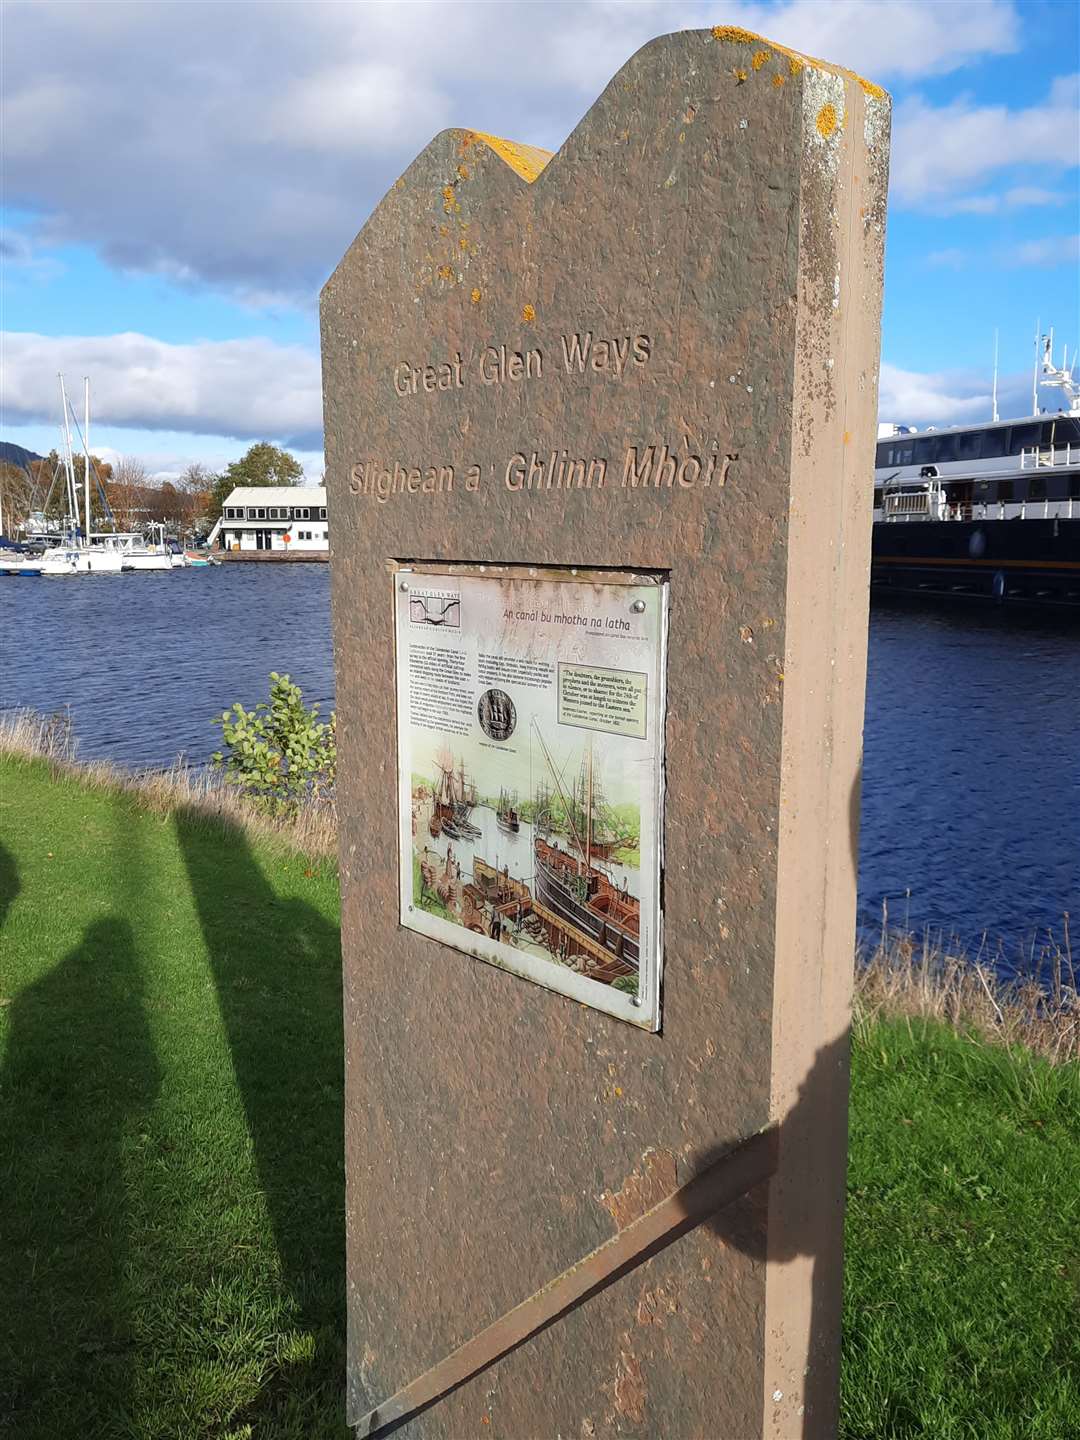 One of many Great Glen Ways plinths –this time on the Caledonian Canal - which gives some information about the history of the waterway.